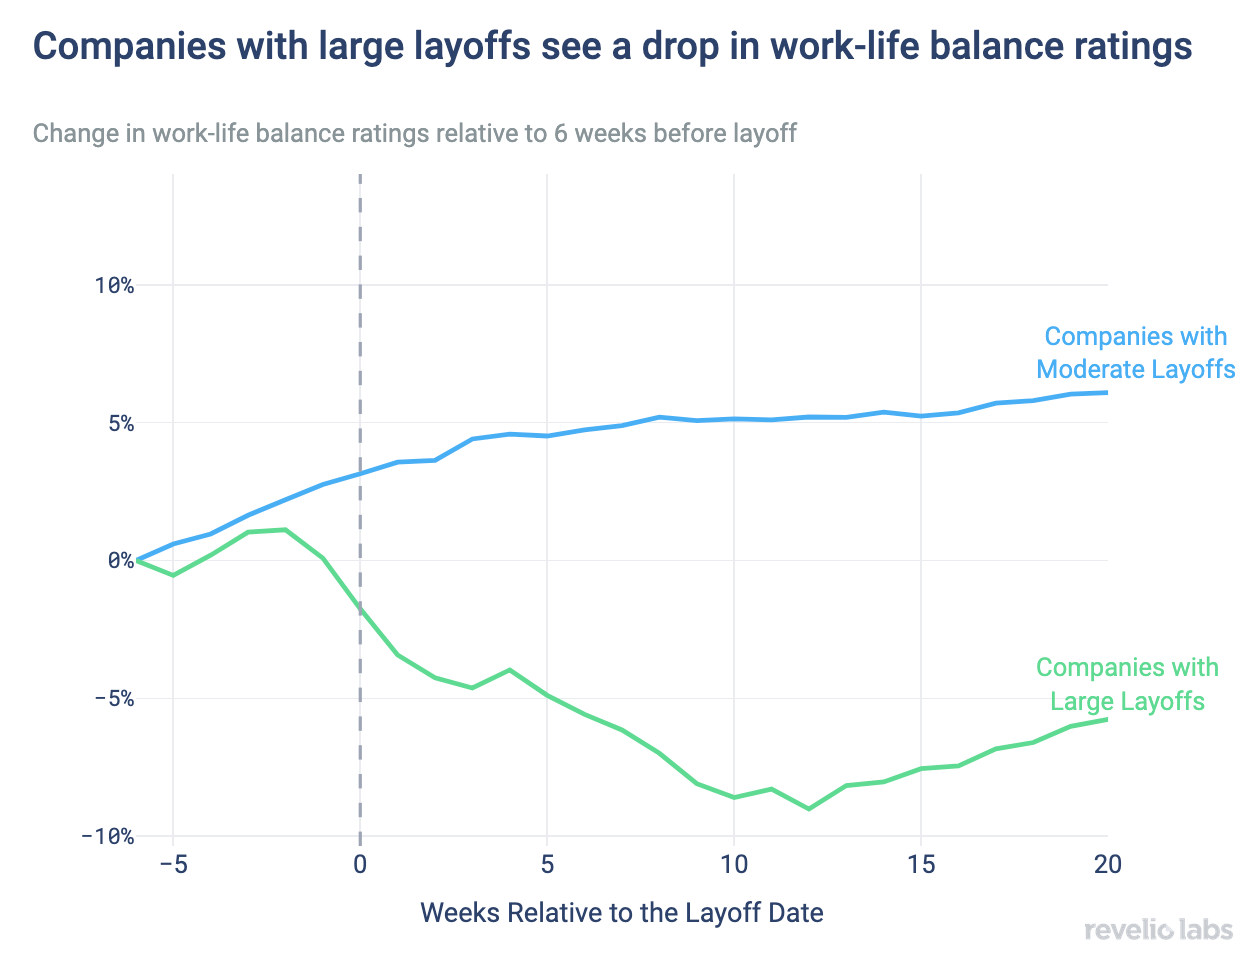 Companies with large layoffs see a drop in work life balance ratings